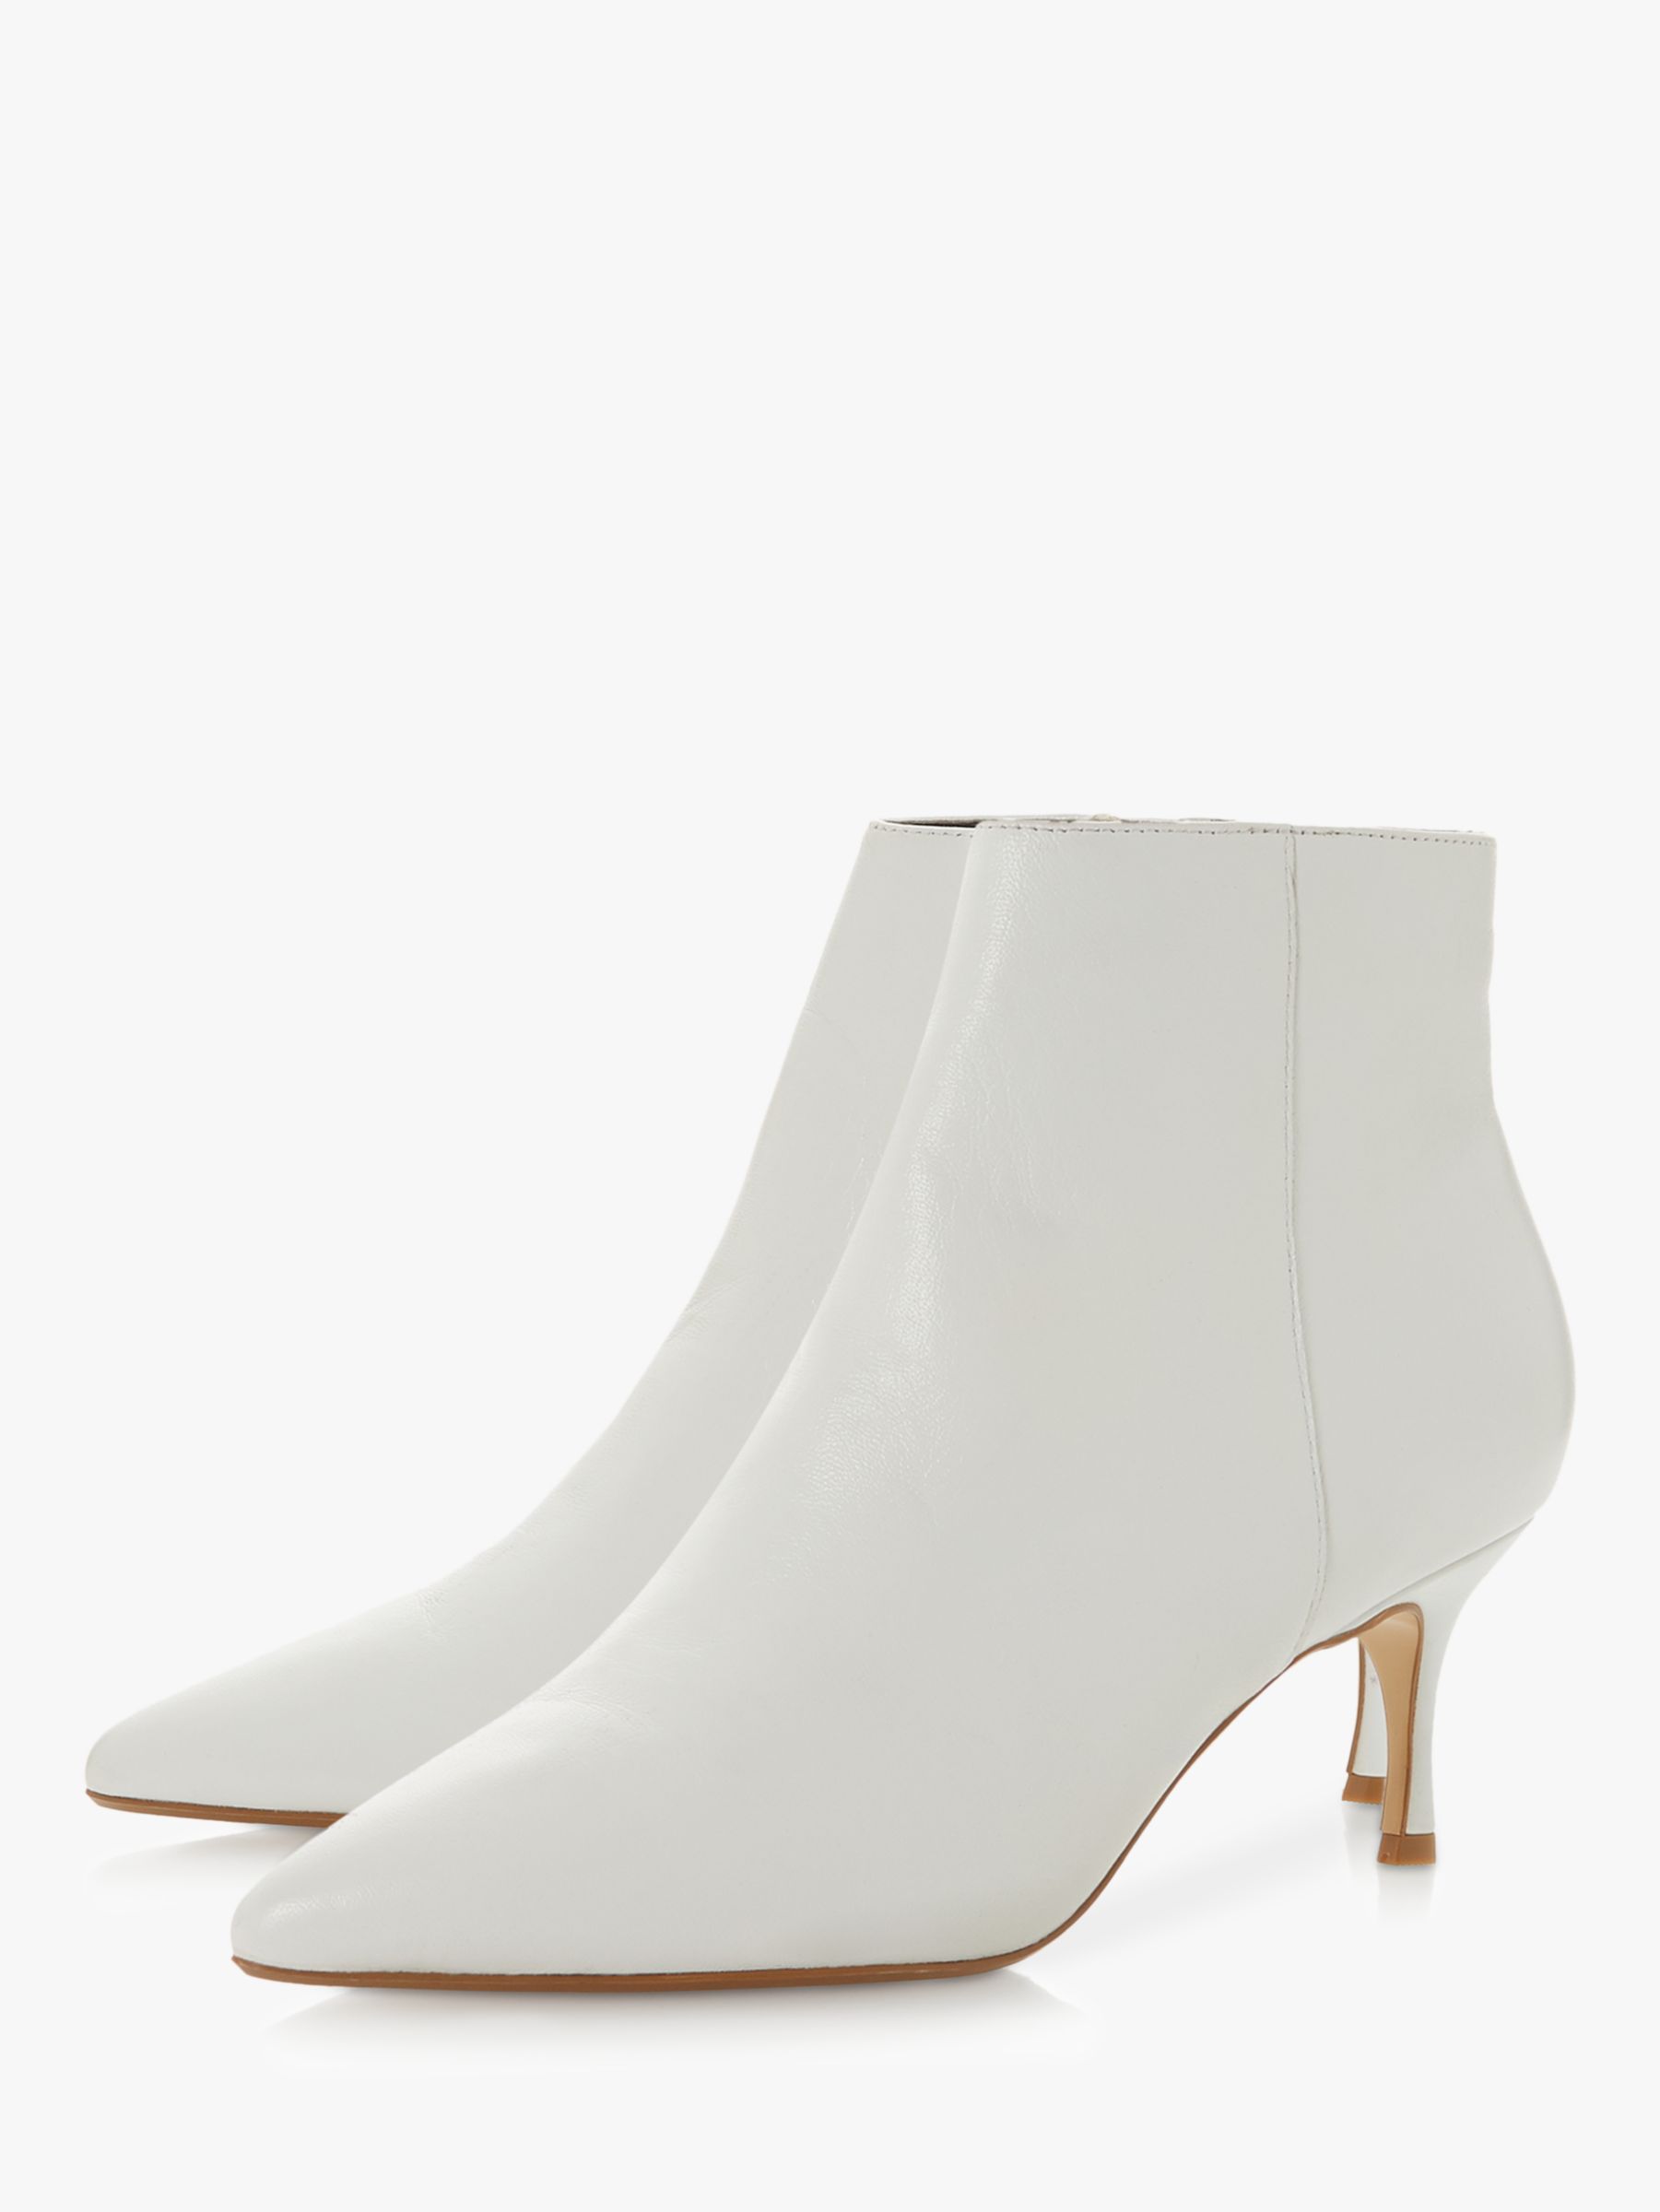 white leather boots uk